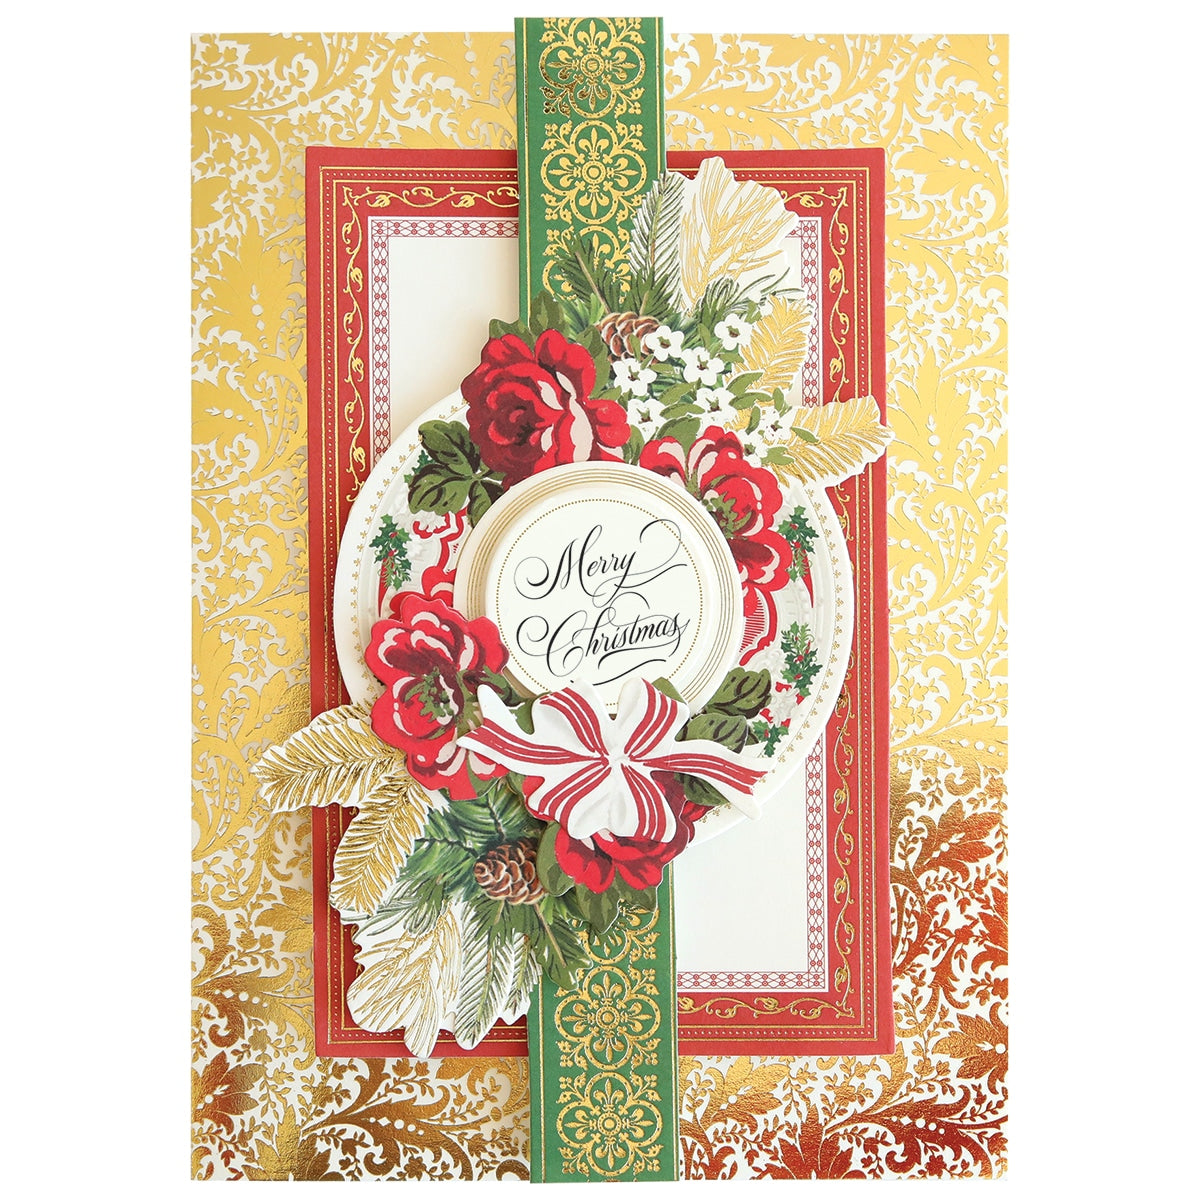 A close up of a Christmas Wishes Card Making Kit with a wreath.